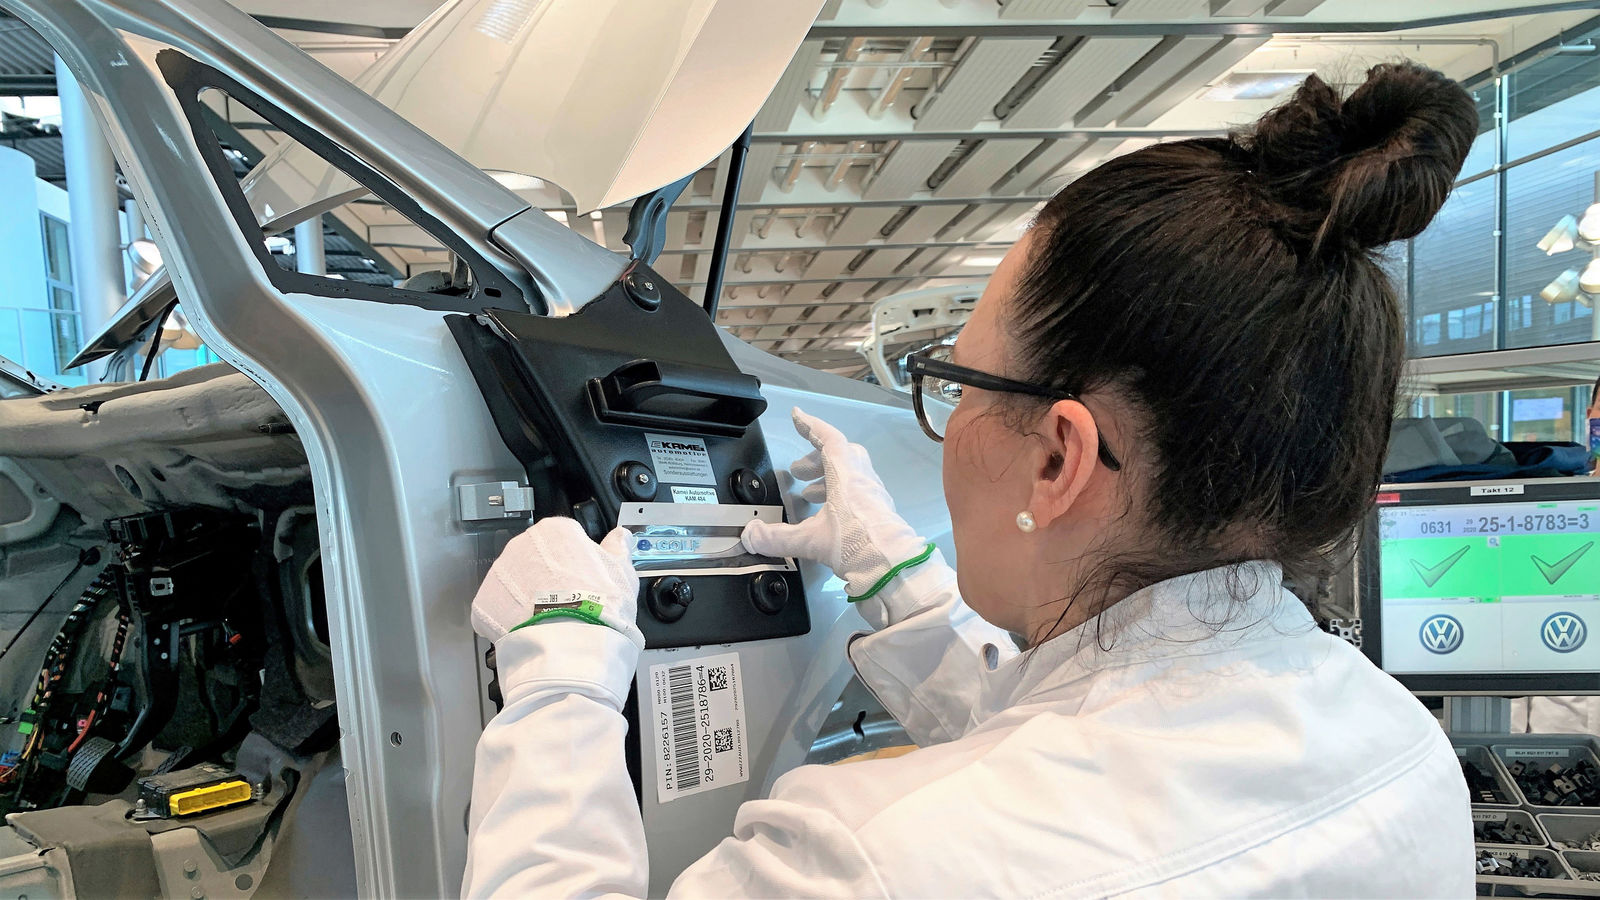 Only at Volkswagen: visitors can help build the e-Golf in the Transparent Factory in Dresden